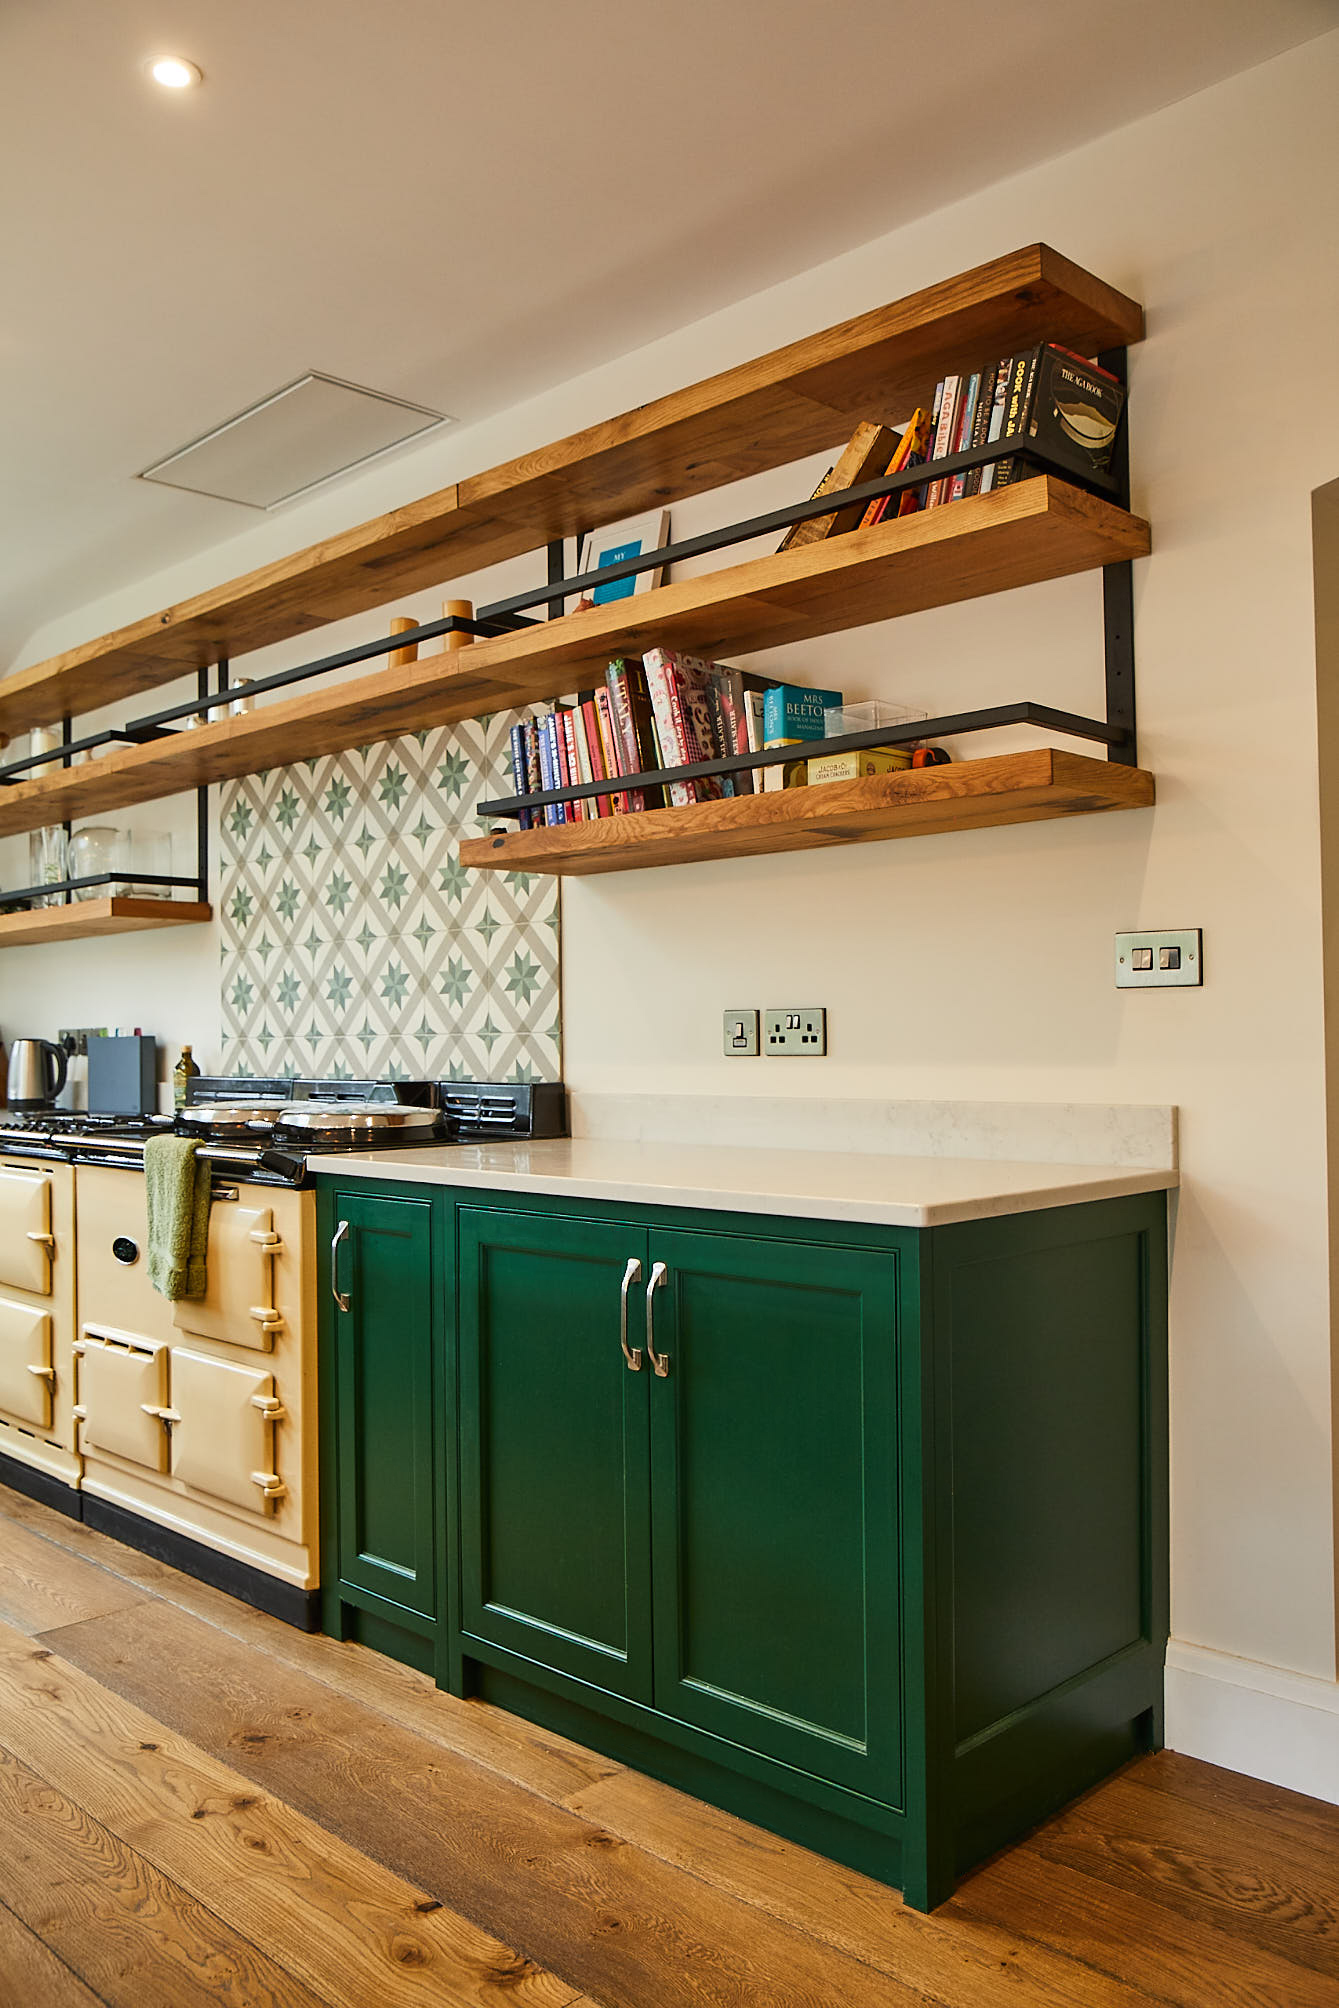 Chunky oak open shelves hang above green kitchen cabinets and cream AGA